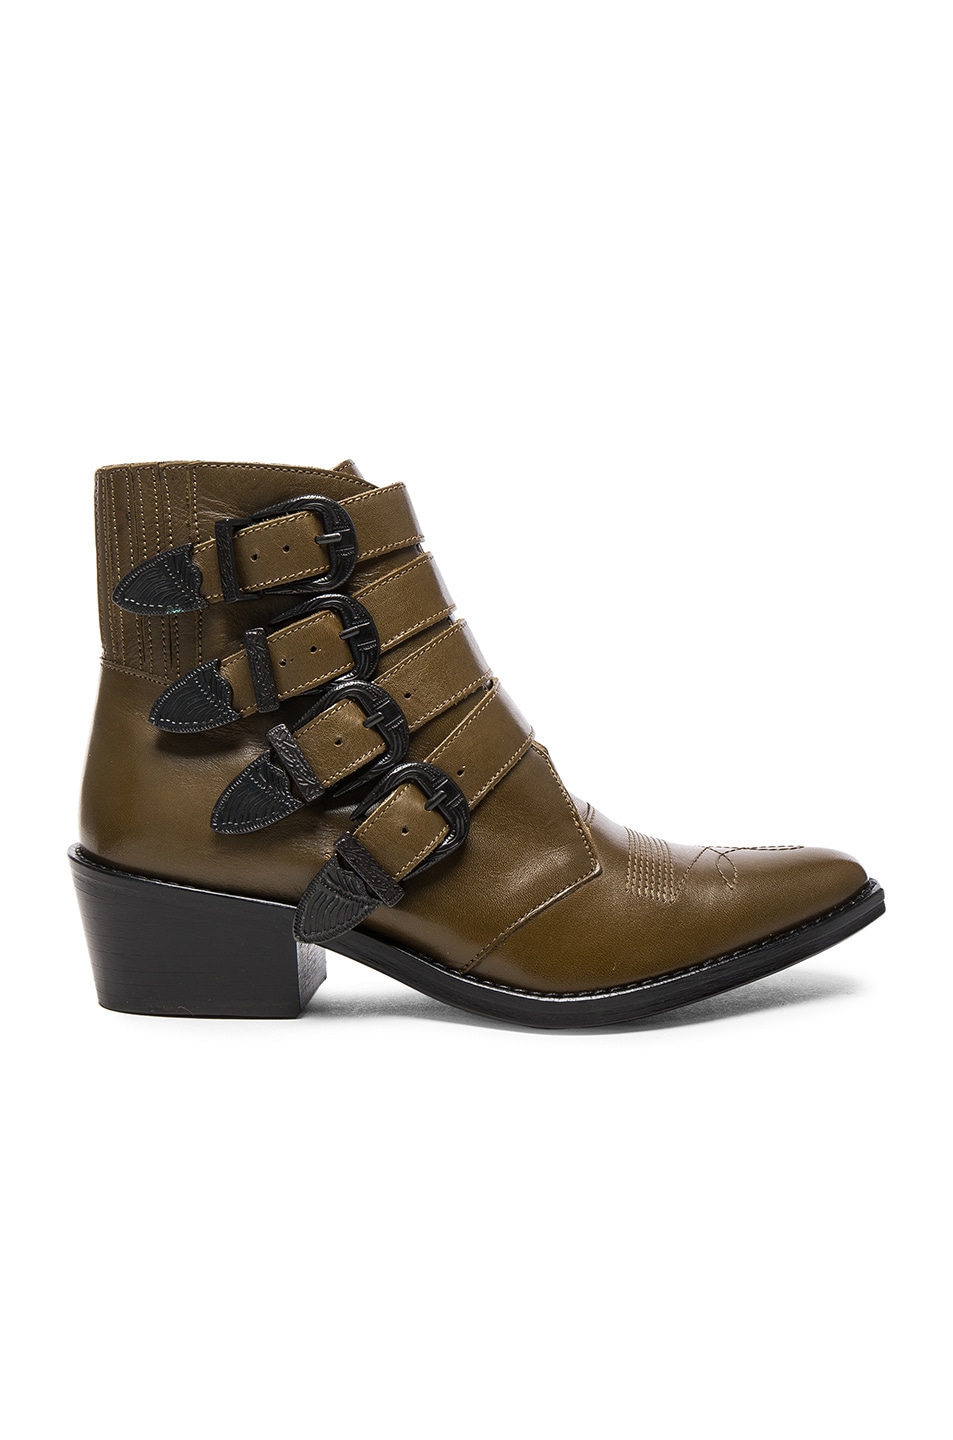 Image 1 of TOGA PULLA Limited Edition Leather Buckle Booties in Truffle